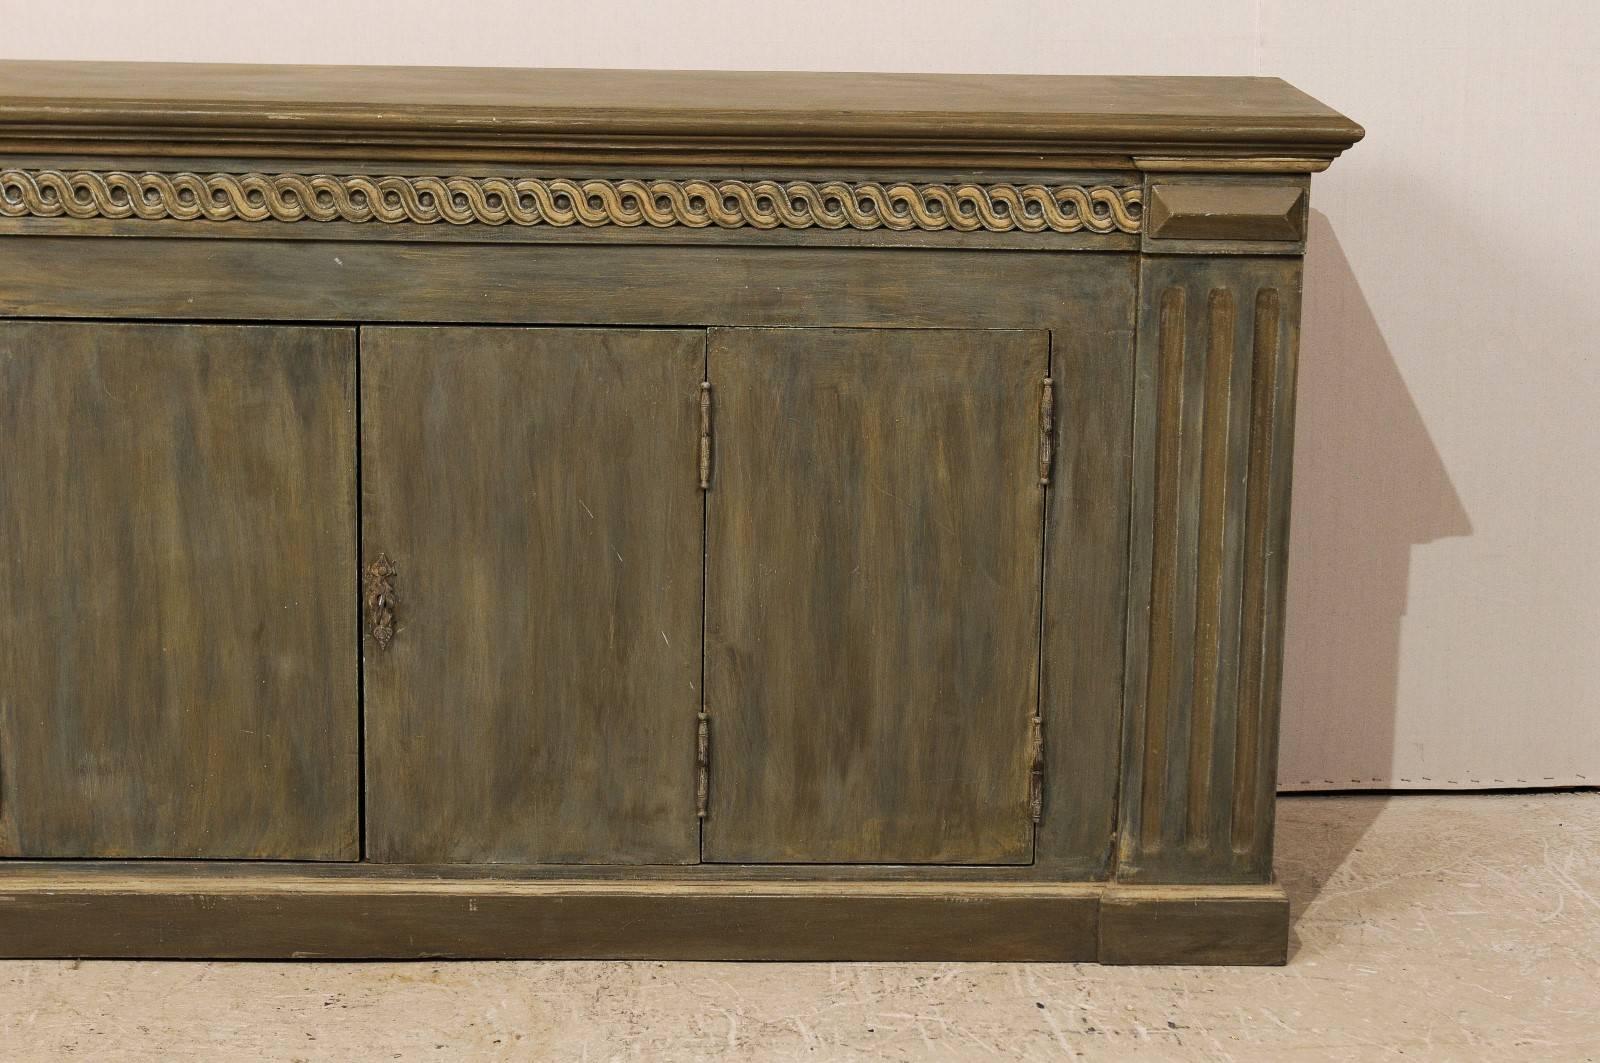 20th Century Brazilian Painted Wood Enfilade or Buffet Cabinet, Guilloche Molding, Grey-Green